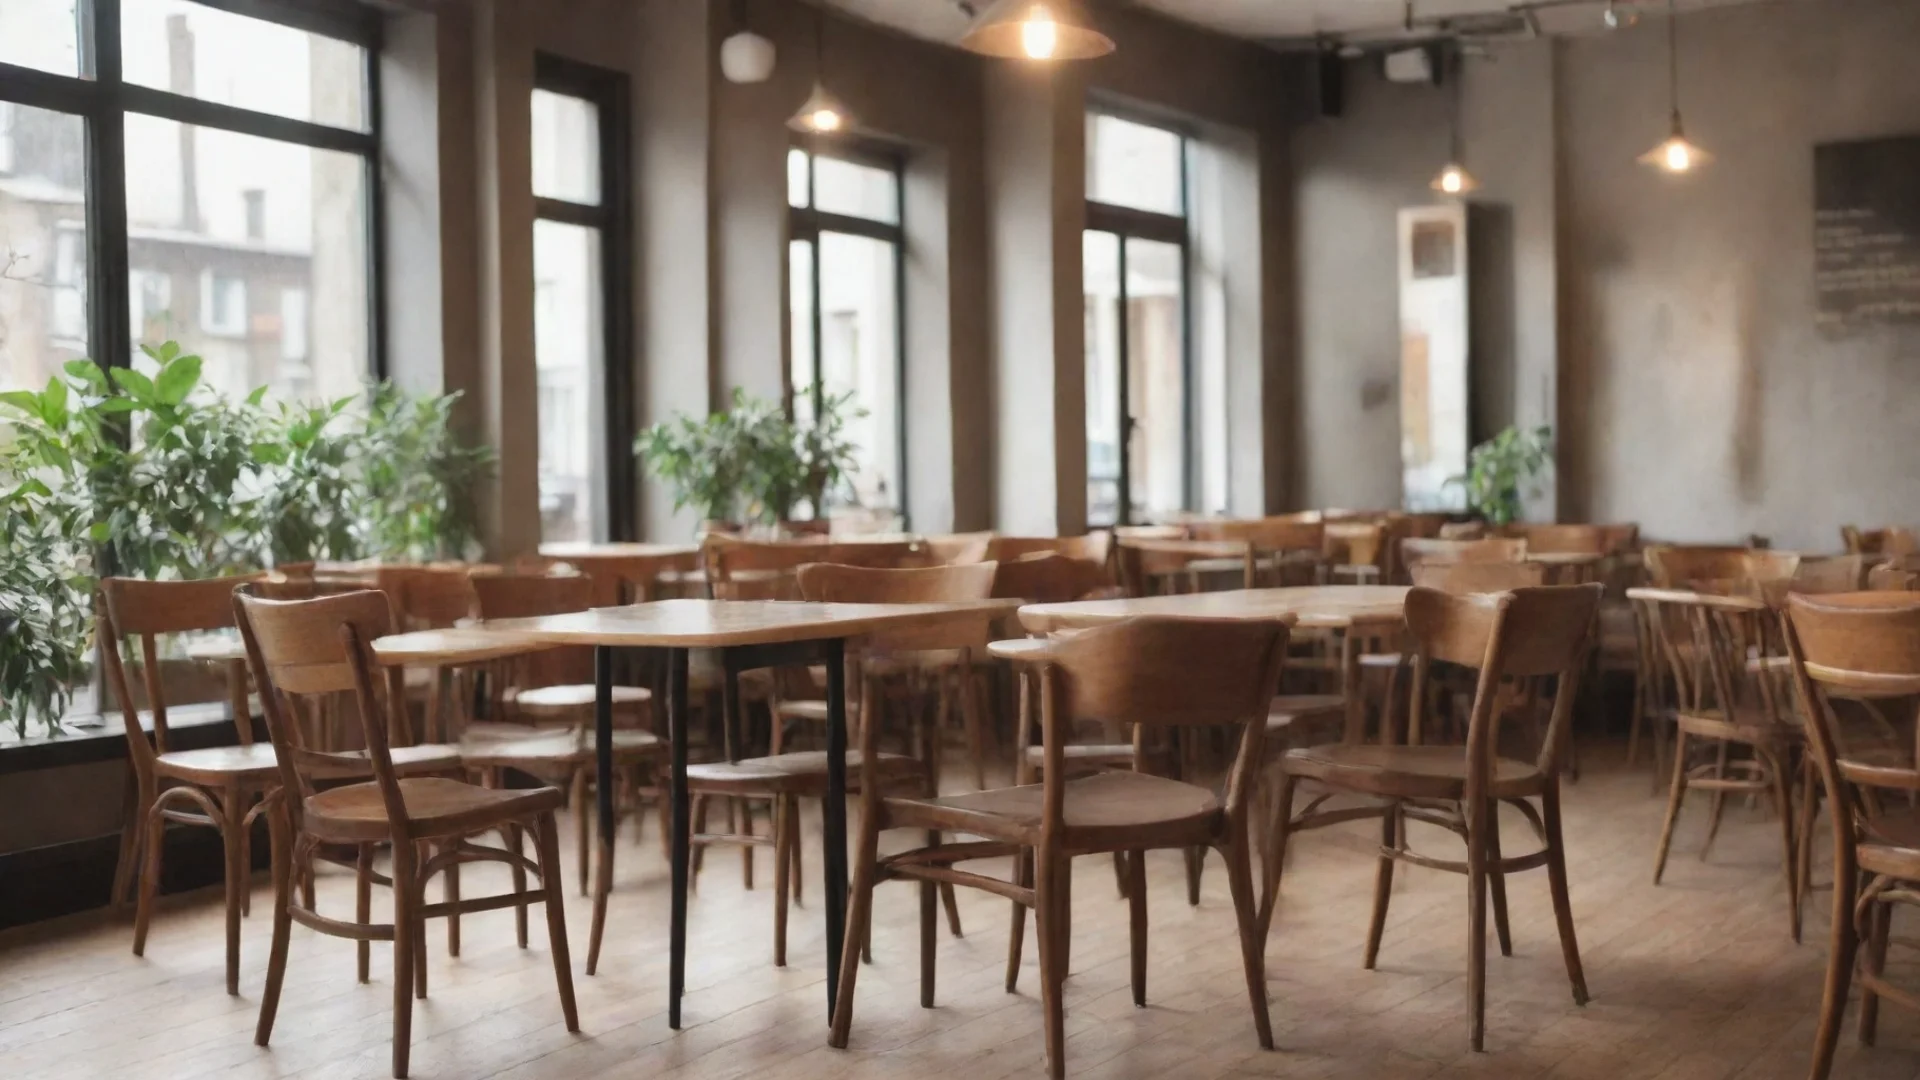 cafe interior background with chairs and tables wide